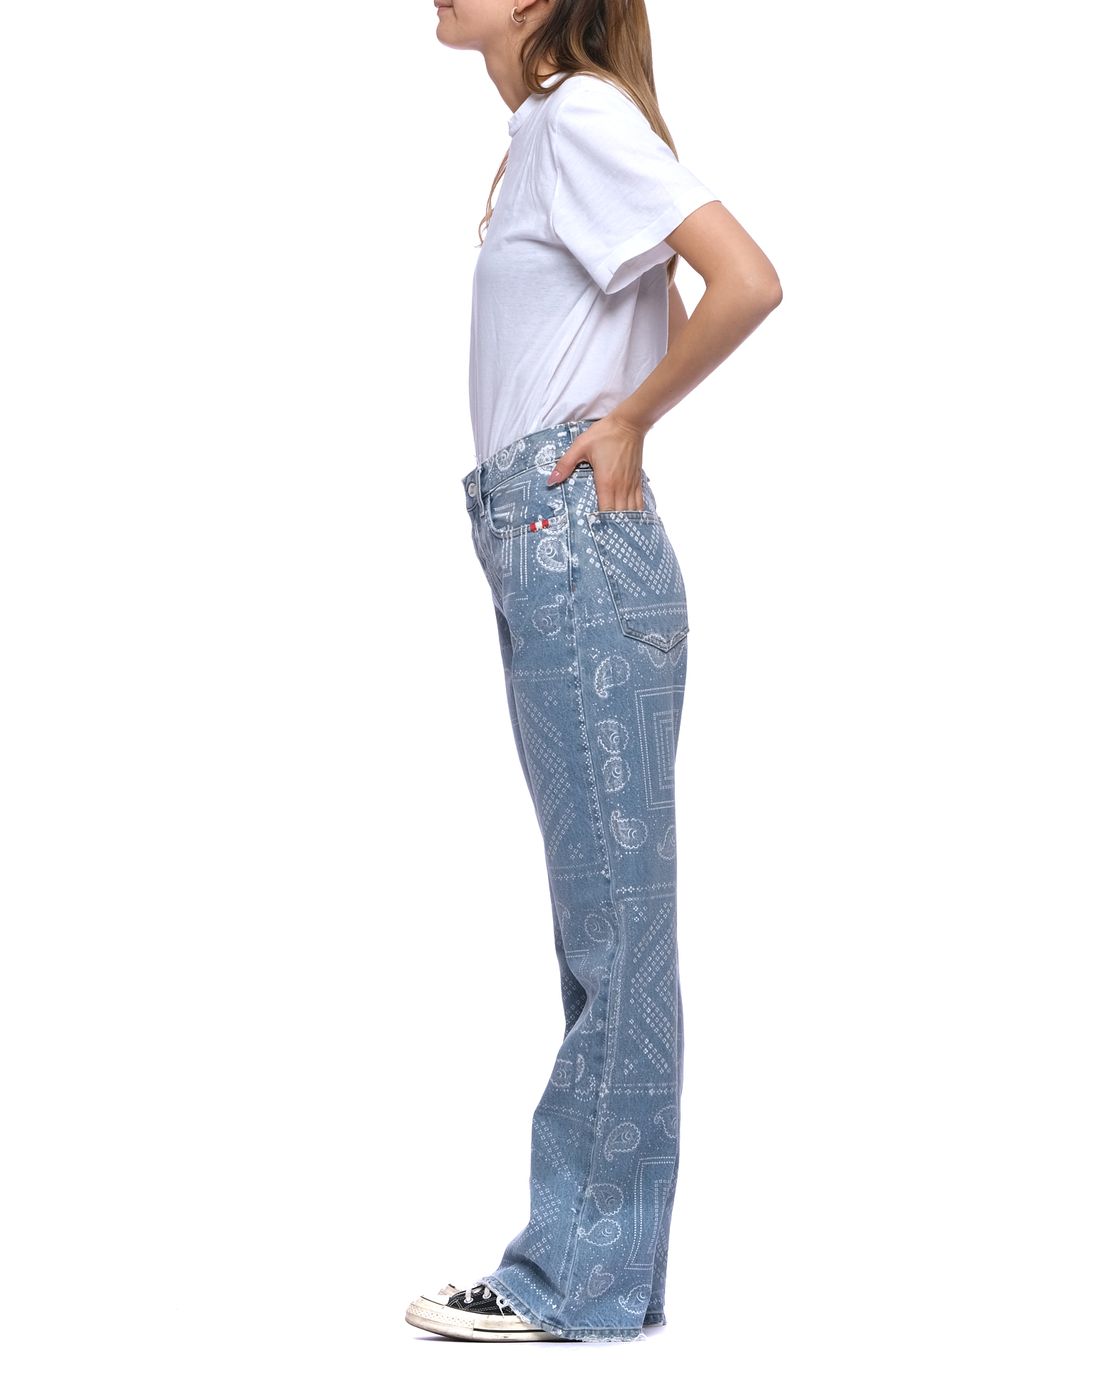 Jeans woman AMISH P22AMD007D469A018 999